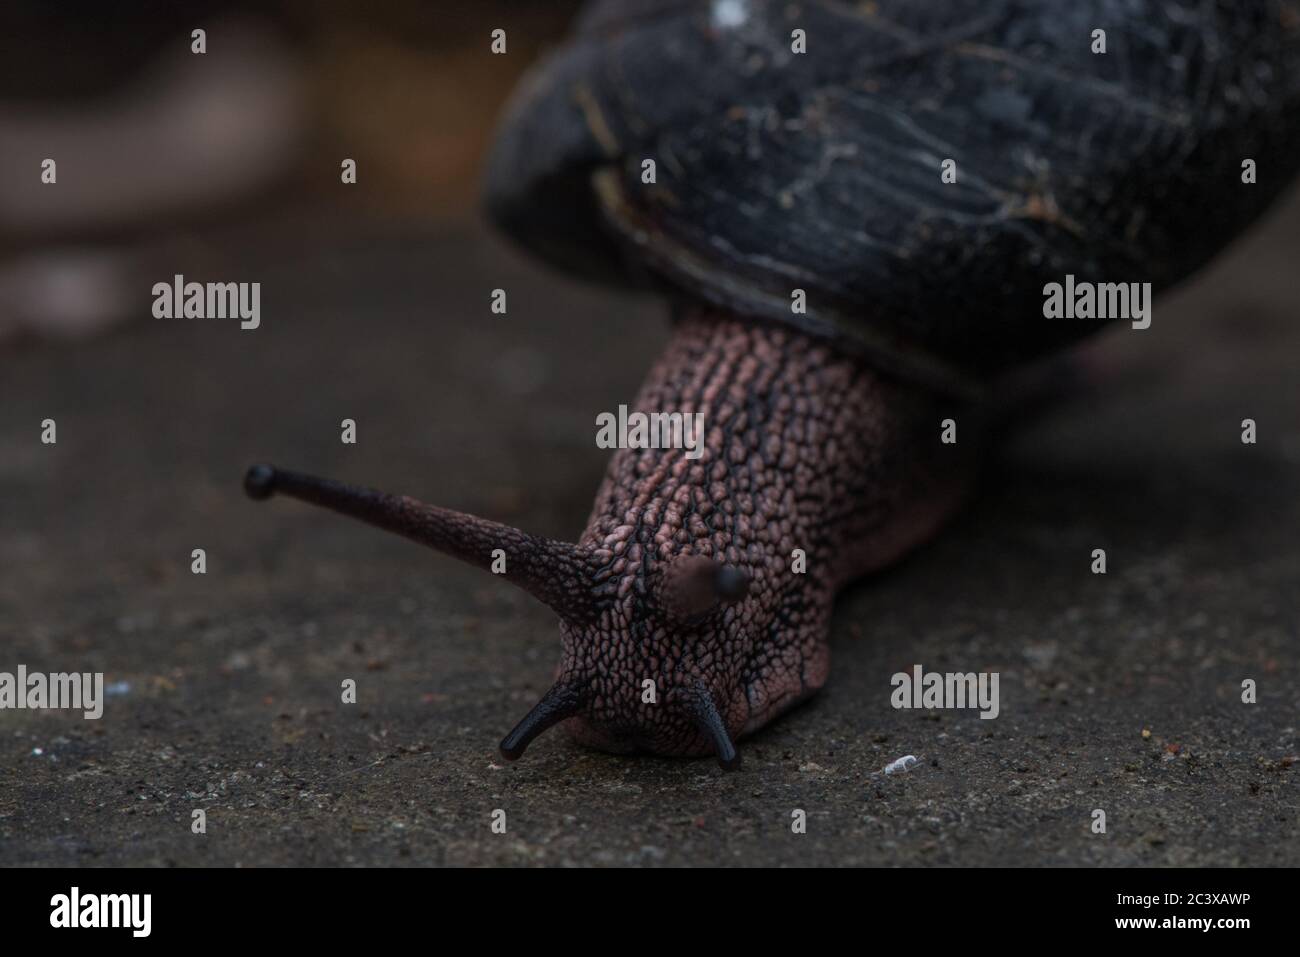 The Redwood Sideband snail (Monadenia infumata) a species endemic to the redwood forests of California and considered to be of conservation concern. Stock Photo